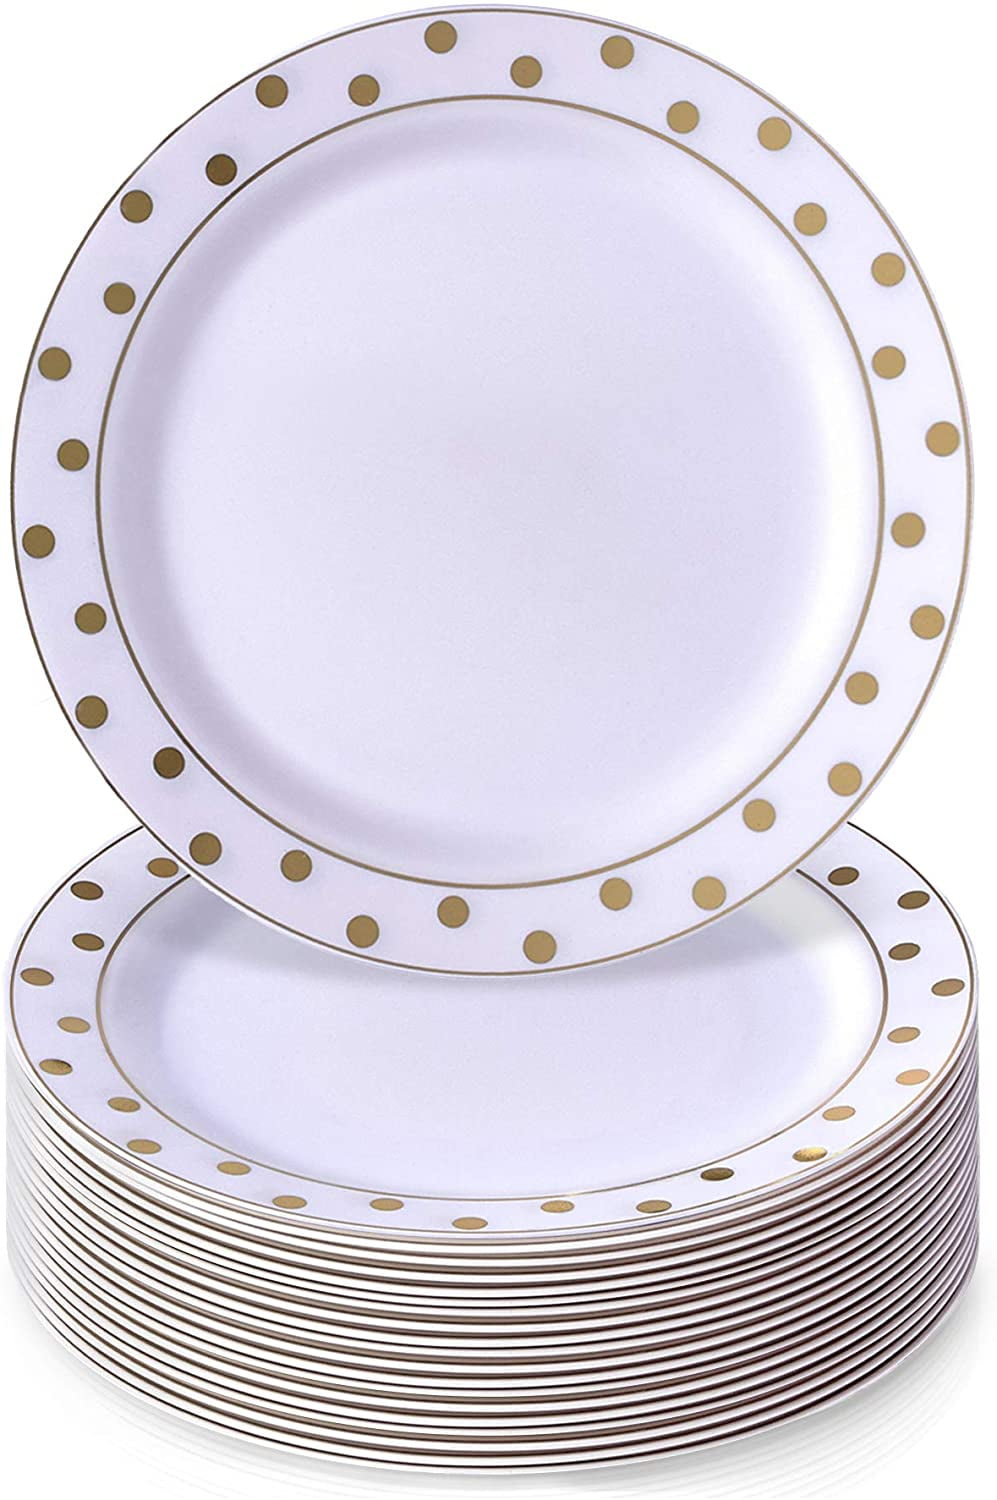 20 pc Mist – White/Gold 10.25” DISPOSABLE DINNER PLATES Heavy Duty Plastic Dishes Elegant Fine China Look 